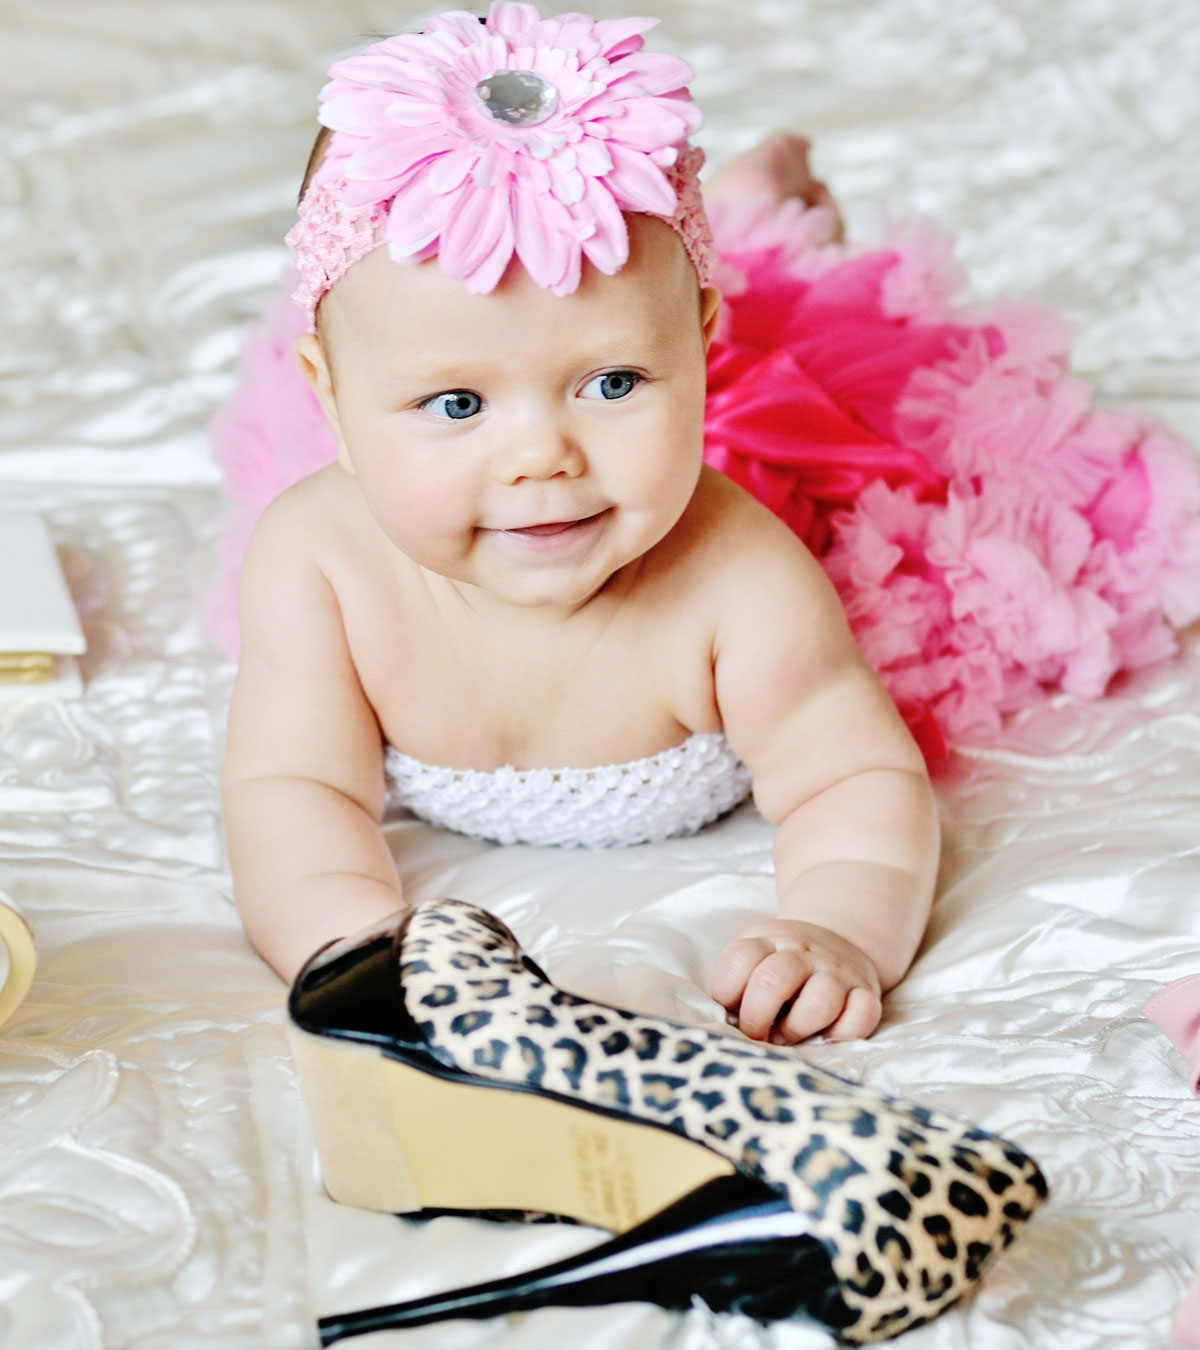 51 Most Fashionable Baby Names Inspired By Fashion Designers